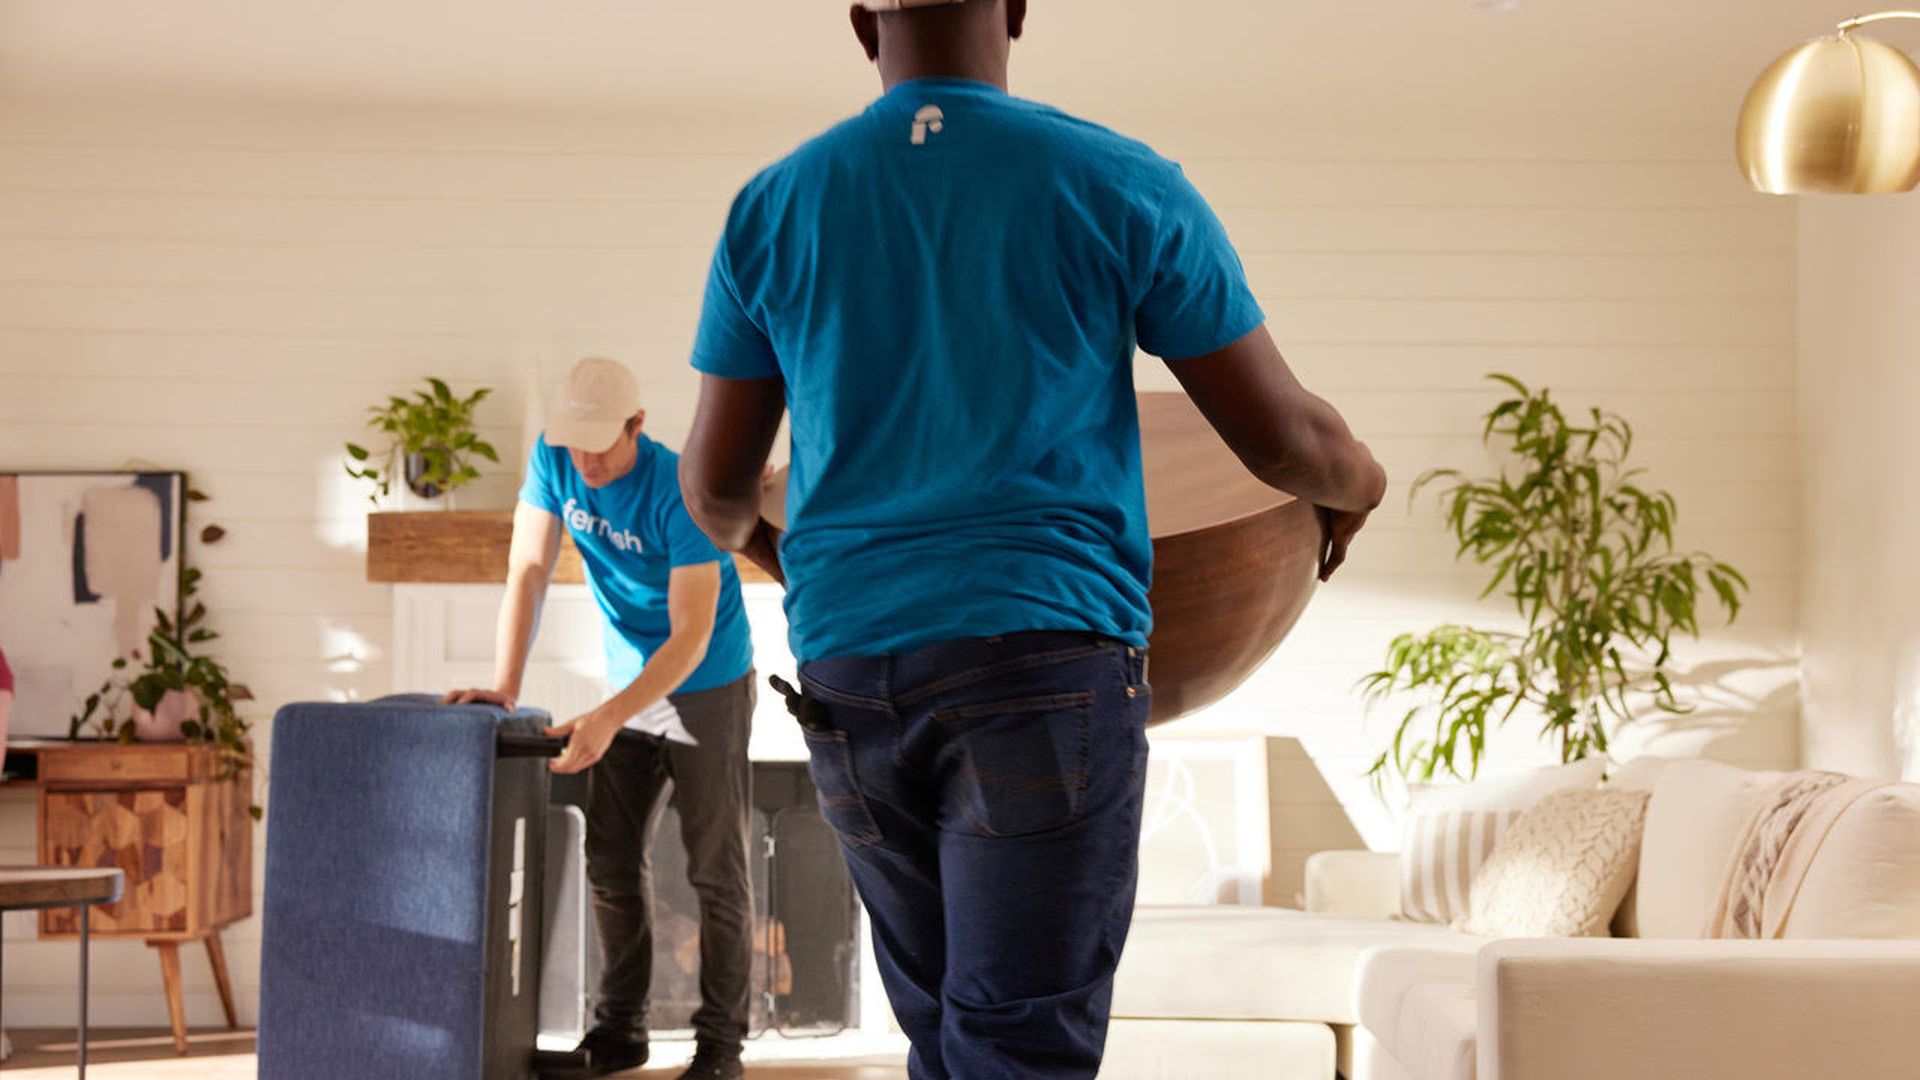 Two male movers, both in blue shirts, assemble furniture in a living room area with sand-colored carpet.